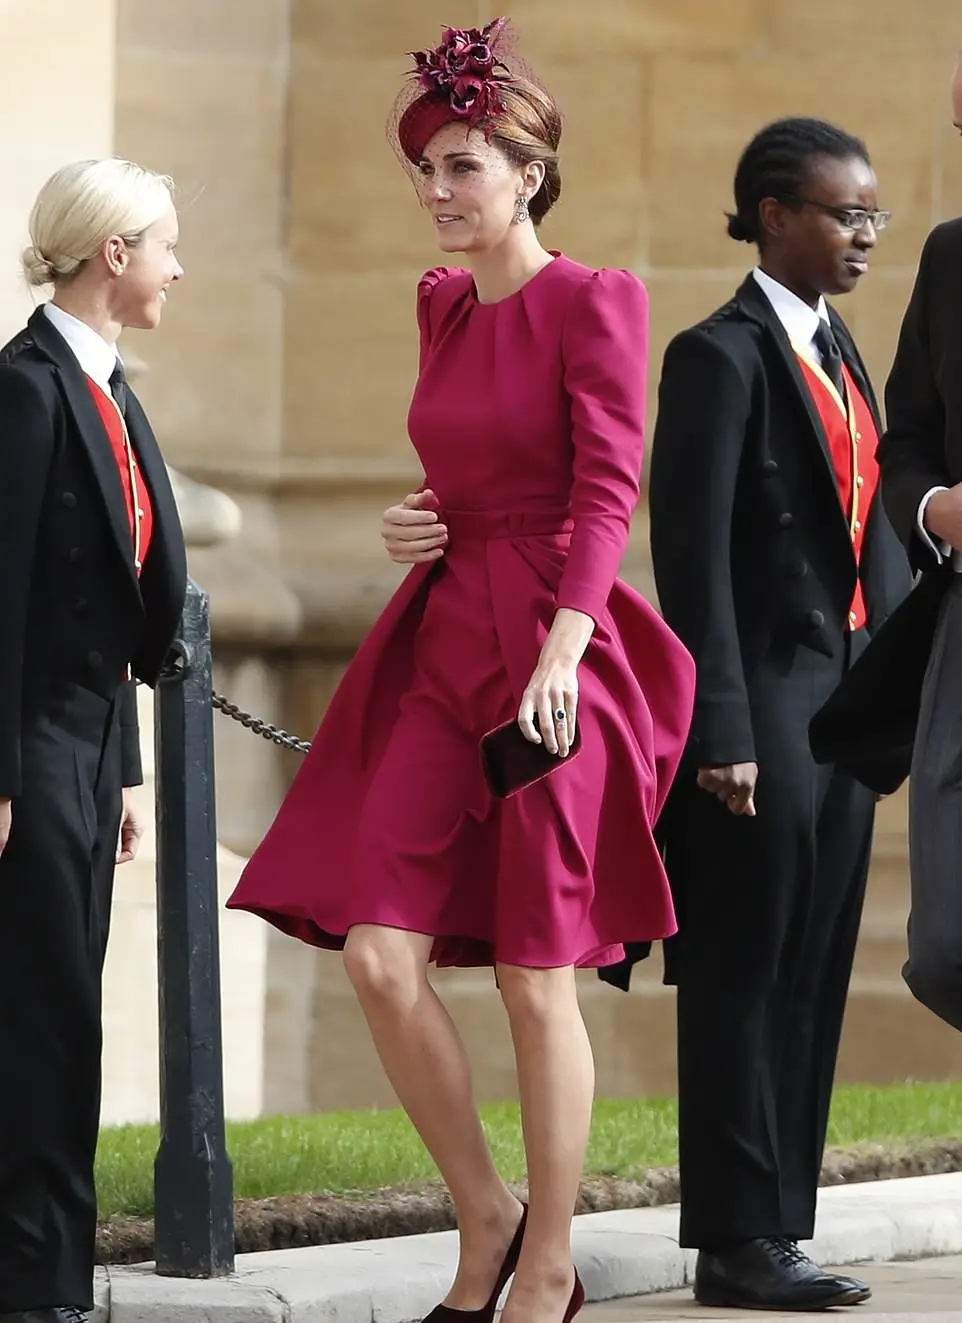 The Duchess of Cambridge in gorgeous raspberry Alexander McQueen at the Royal Wedding